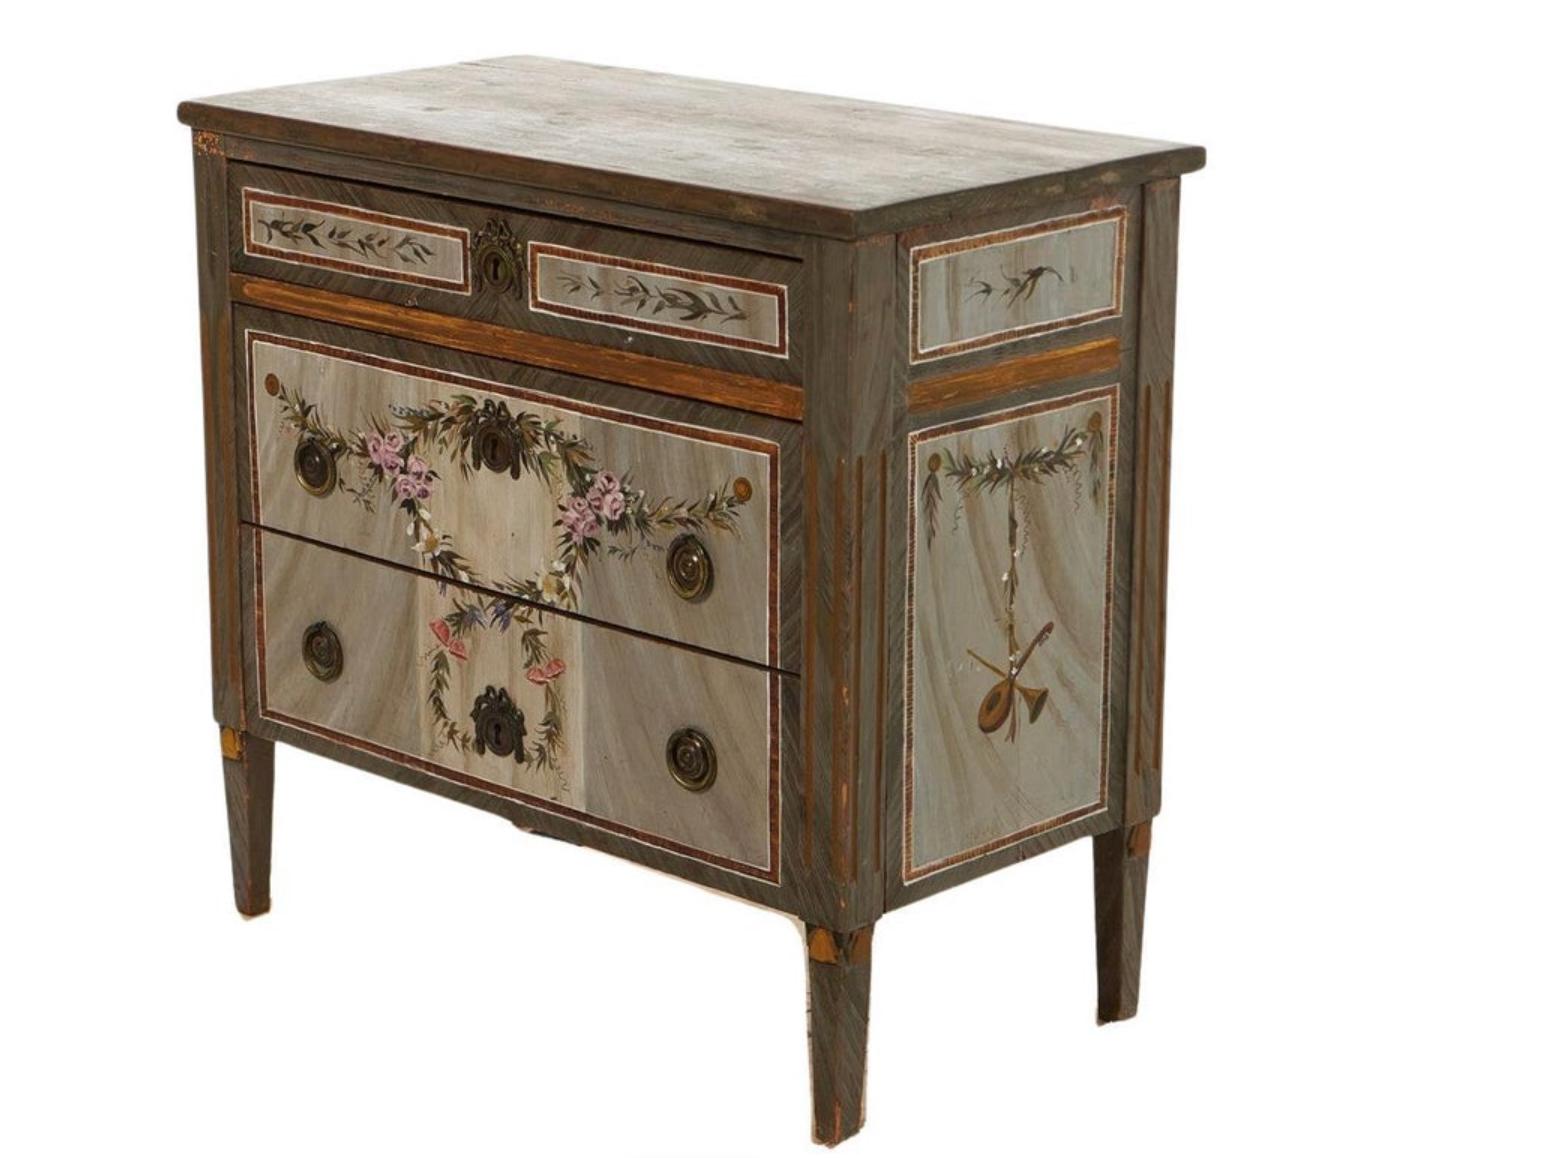 Circa 1850/1880 antique Swedish Gustavian chest of drawers commode in gustavian style with classic Gustavian ribbing detail on the drawer fronts and leading edges. 

It has been later painted in the style of Nils Johan Asplinds with stunning wreath